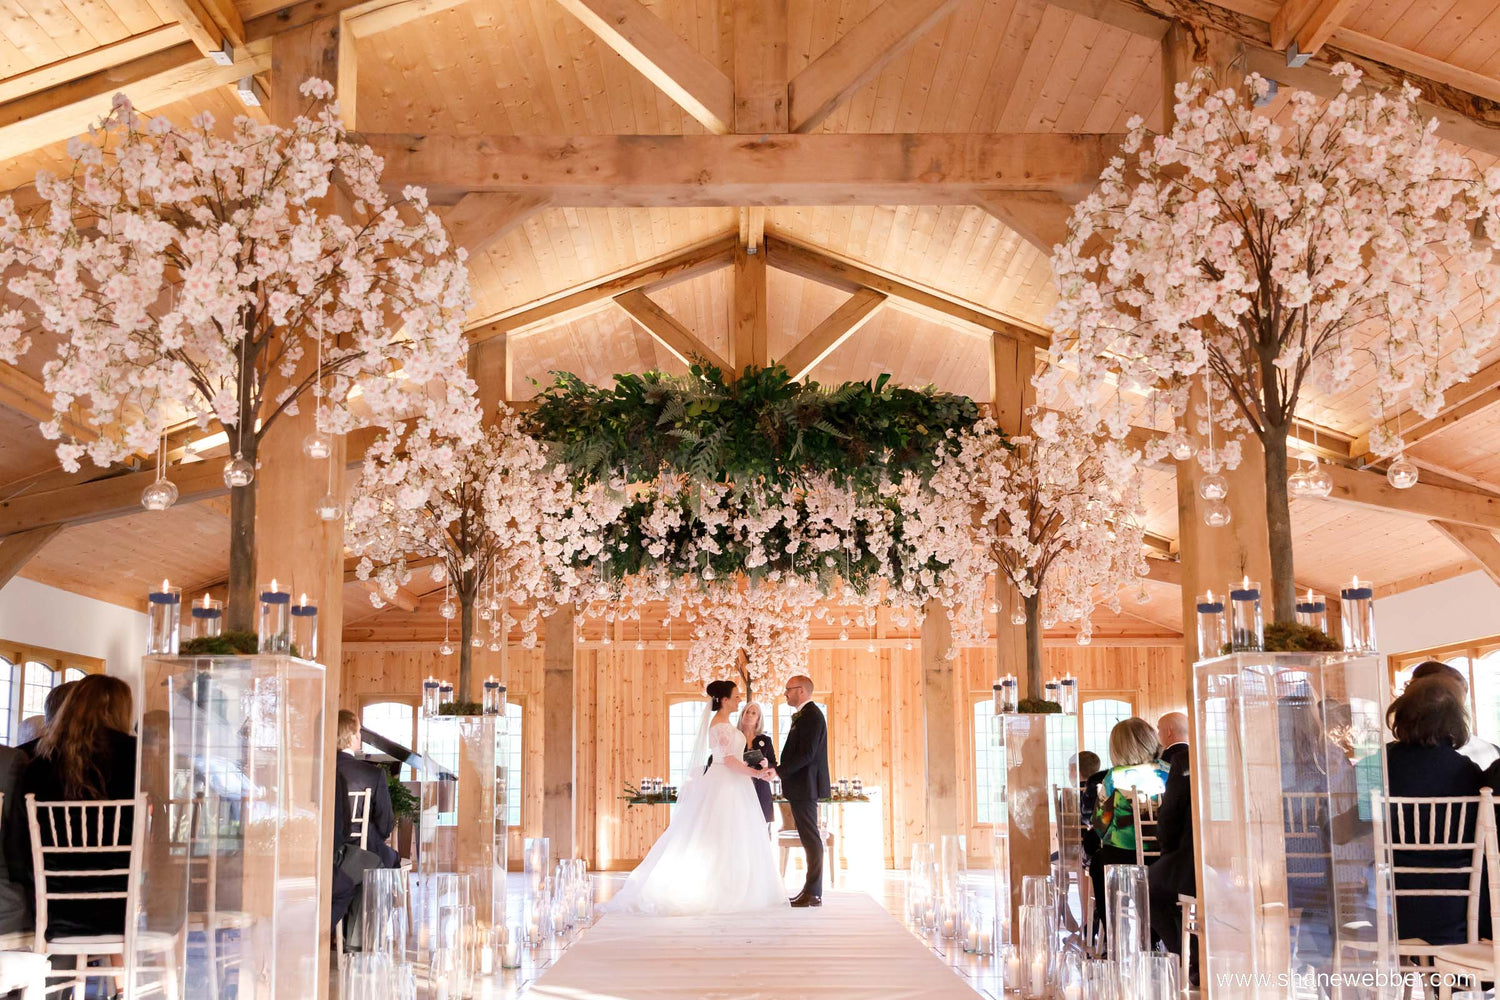 The Best Wedding Venues In Manchester